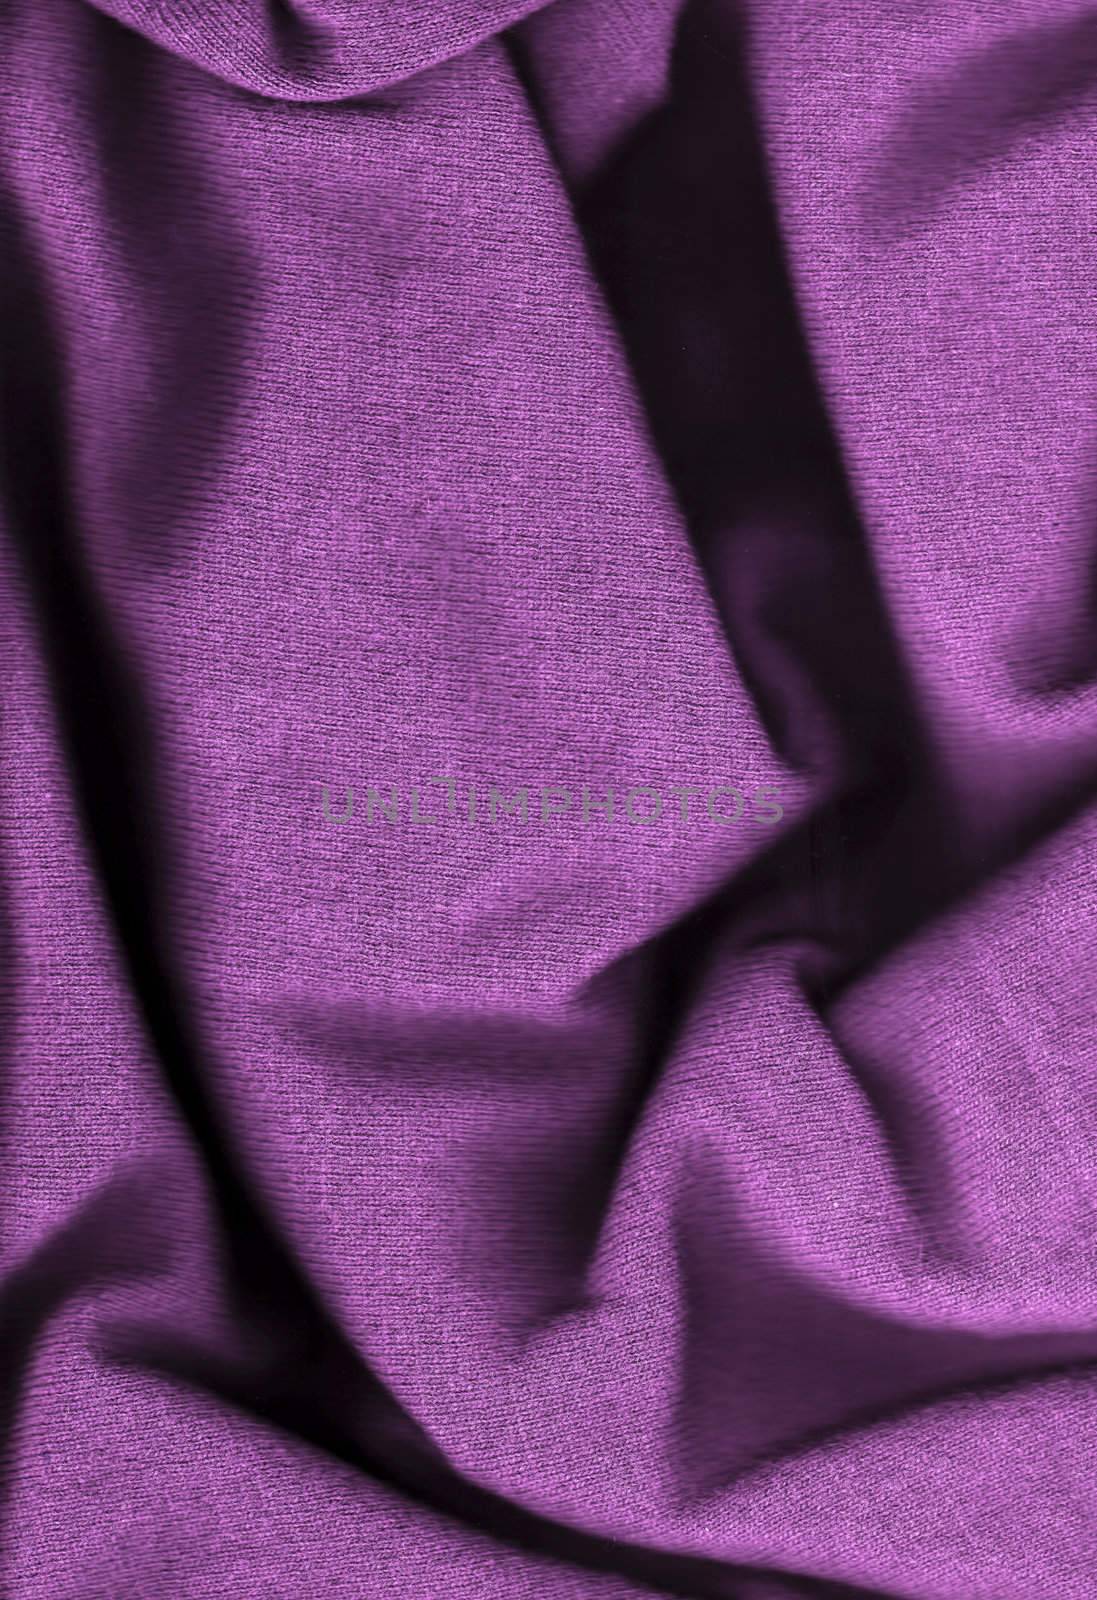 Purple wool by magraphics